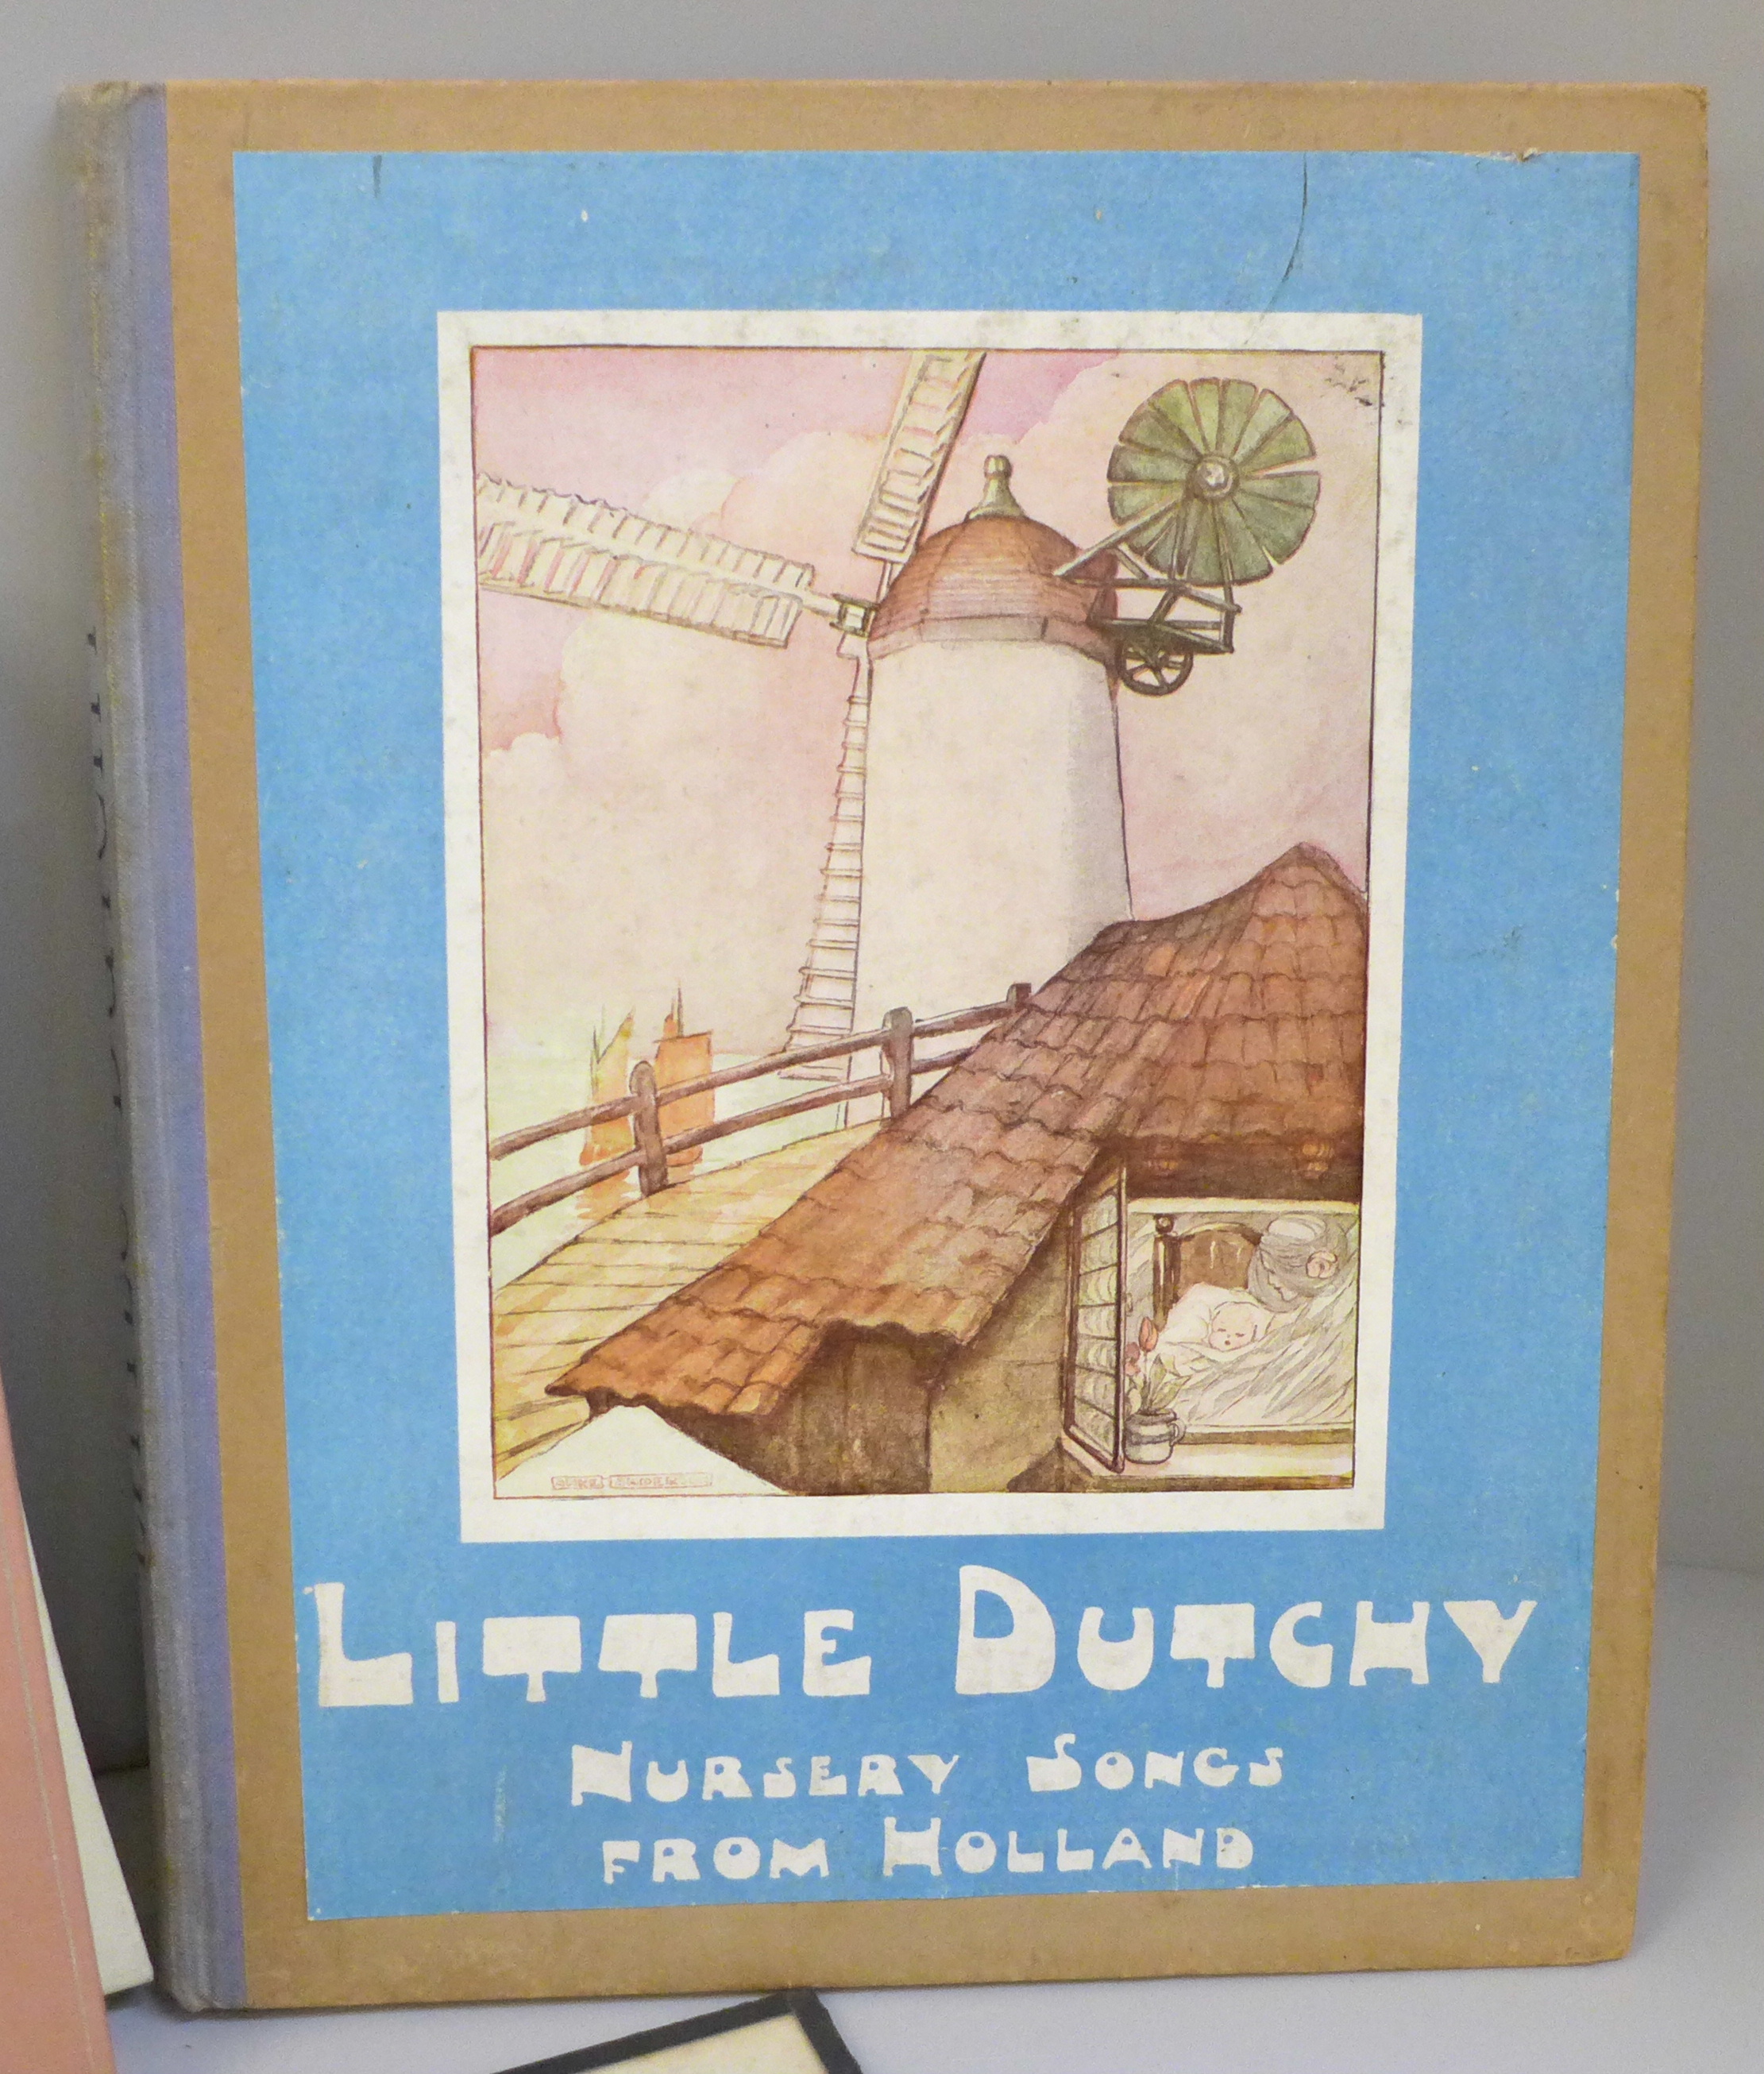 A child's nursery rhyme book, Little Dutch Nursery Songs from Holland, other books and six prints of - Image 6 of 11